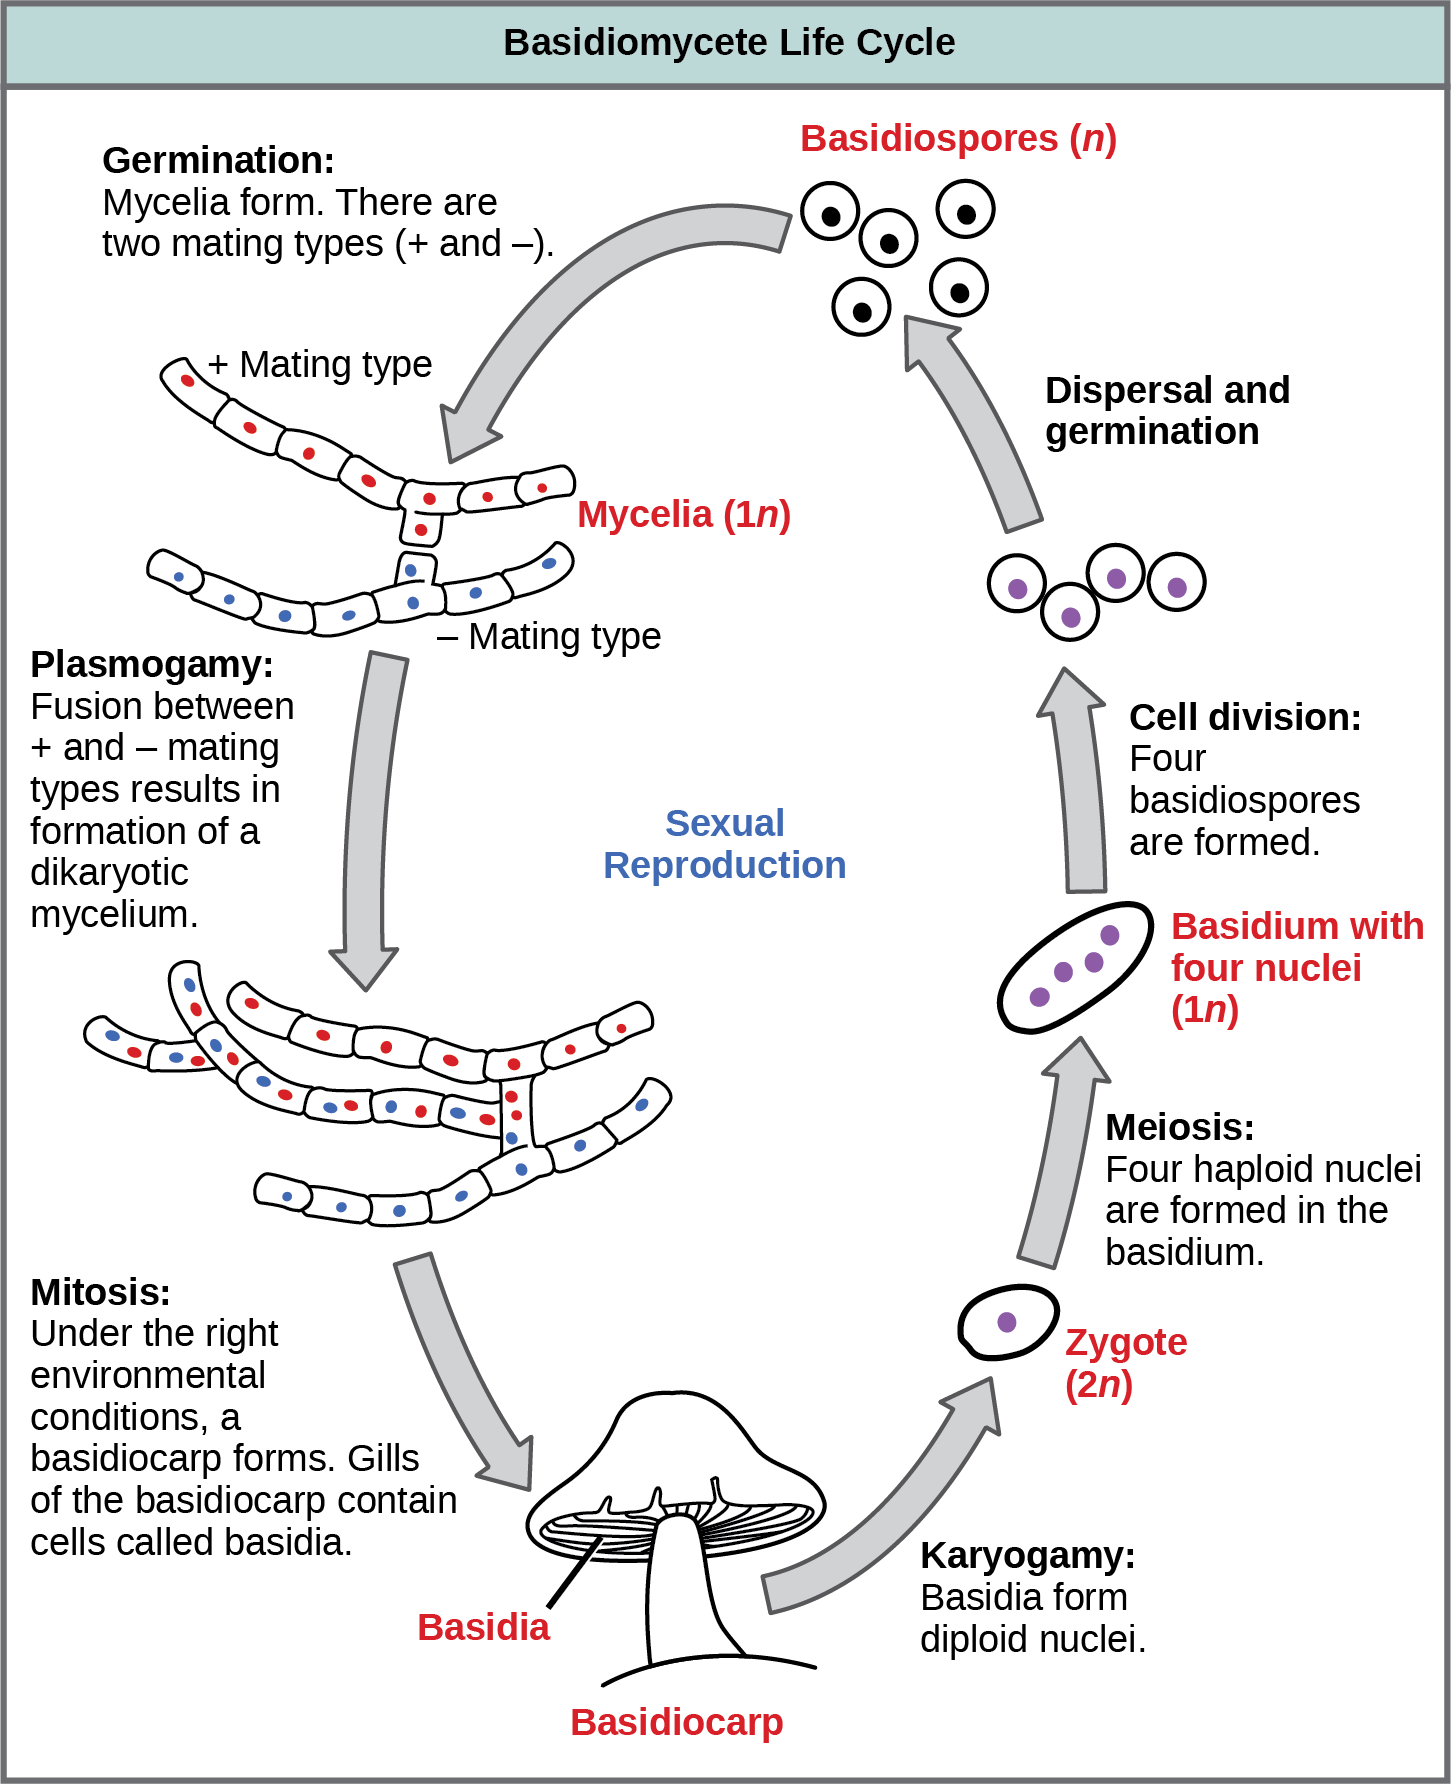 The life cycle of basidiomycetes, better known as mushrooms, is shown. Basidiomycetes have a sexual life cycle that begins with the germination of 1n basidiospores into mycelia with plus and minus mating types. In a process called plasmogamy, the plus and minus mycelia form a dikaryotic mycelium. Under the right conditions, the dikaryotic mycelium grows into a basdiocarp, or mushroom. Gills on the underside of the mushroom cap contain cells called basidia. The basidia undergo karyogamy to form a 2n zygote. The zygote undergoes meiosis to form cells with four haploid (1n) nuclei. Cell division results in four basidiospores. Dispersal and germination of basidiospores ends the cycle.